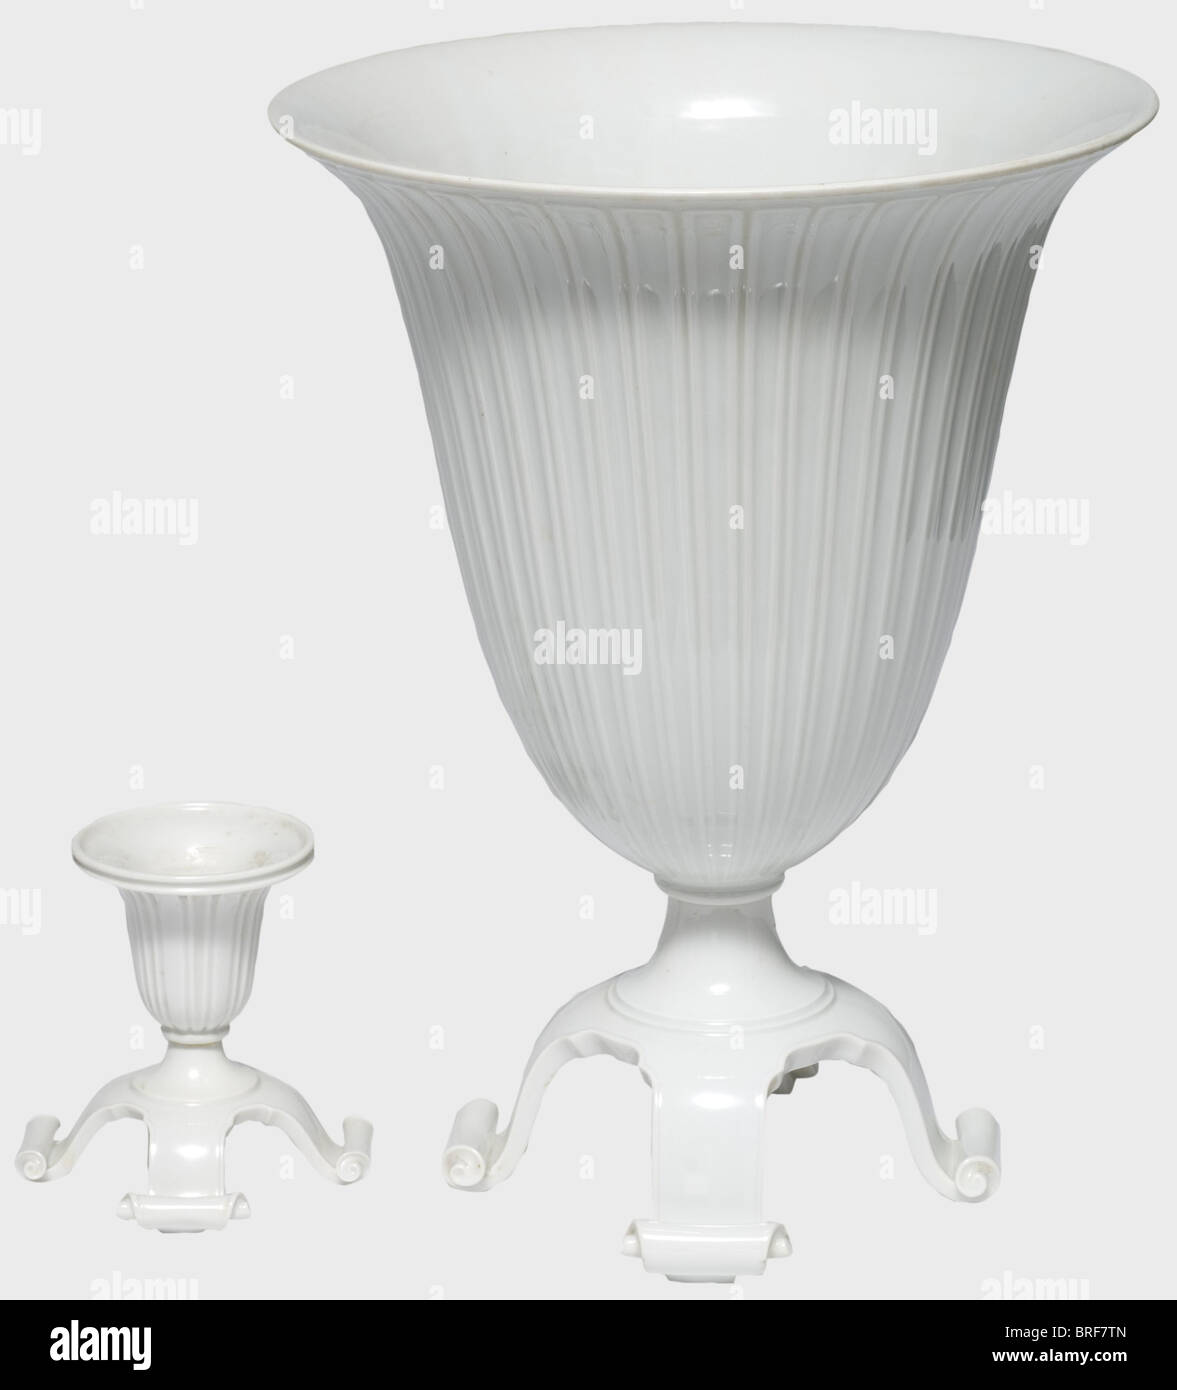 A krater vase and a candel holder, designed by Adolf Röhring. White glazed porcelain, the sides with ribbed decoration. Four curved feet with the ends rolled inward. Manufacturer's pressmark, artist's signature 'Röhring', and the model number '515' are on the bottom. Height 33 cm. Includes the candel holder of the same shape and style, with the pressmark and artist's signature on the bottom, but no model number. Height 10.8 cm. Undamaged, extremely rare, not in the 1938/39 factory catalogue. Cf. Hermann Historica, 46th auction, 7/8May 2004, lot 5703. historic, , Stock Photo